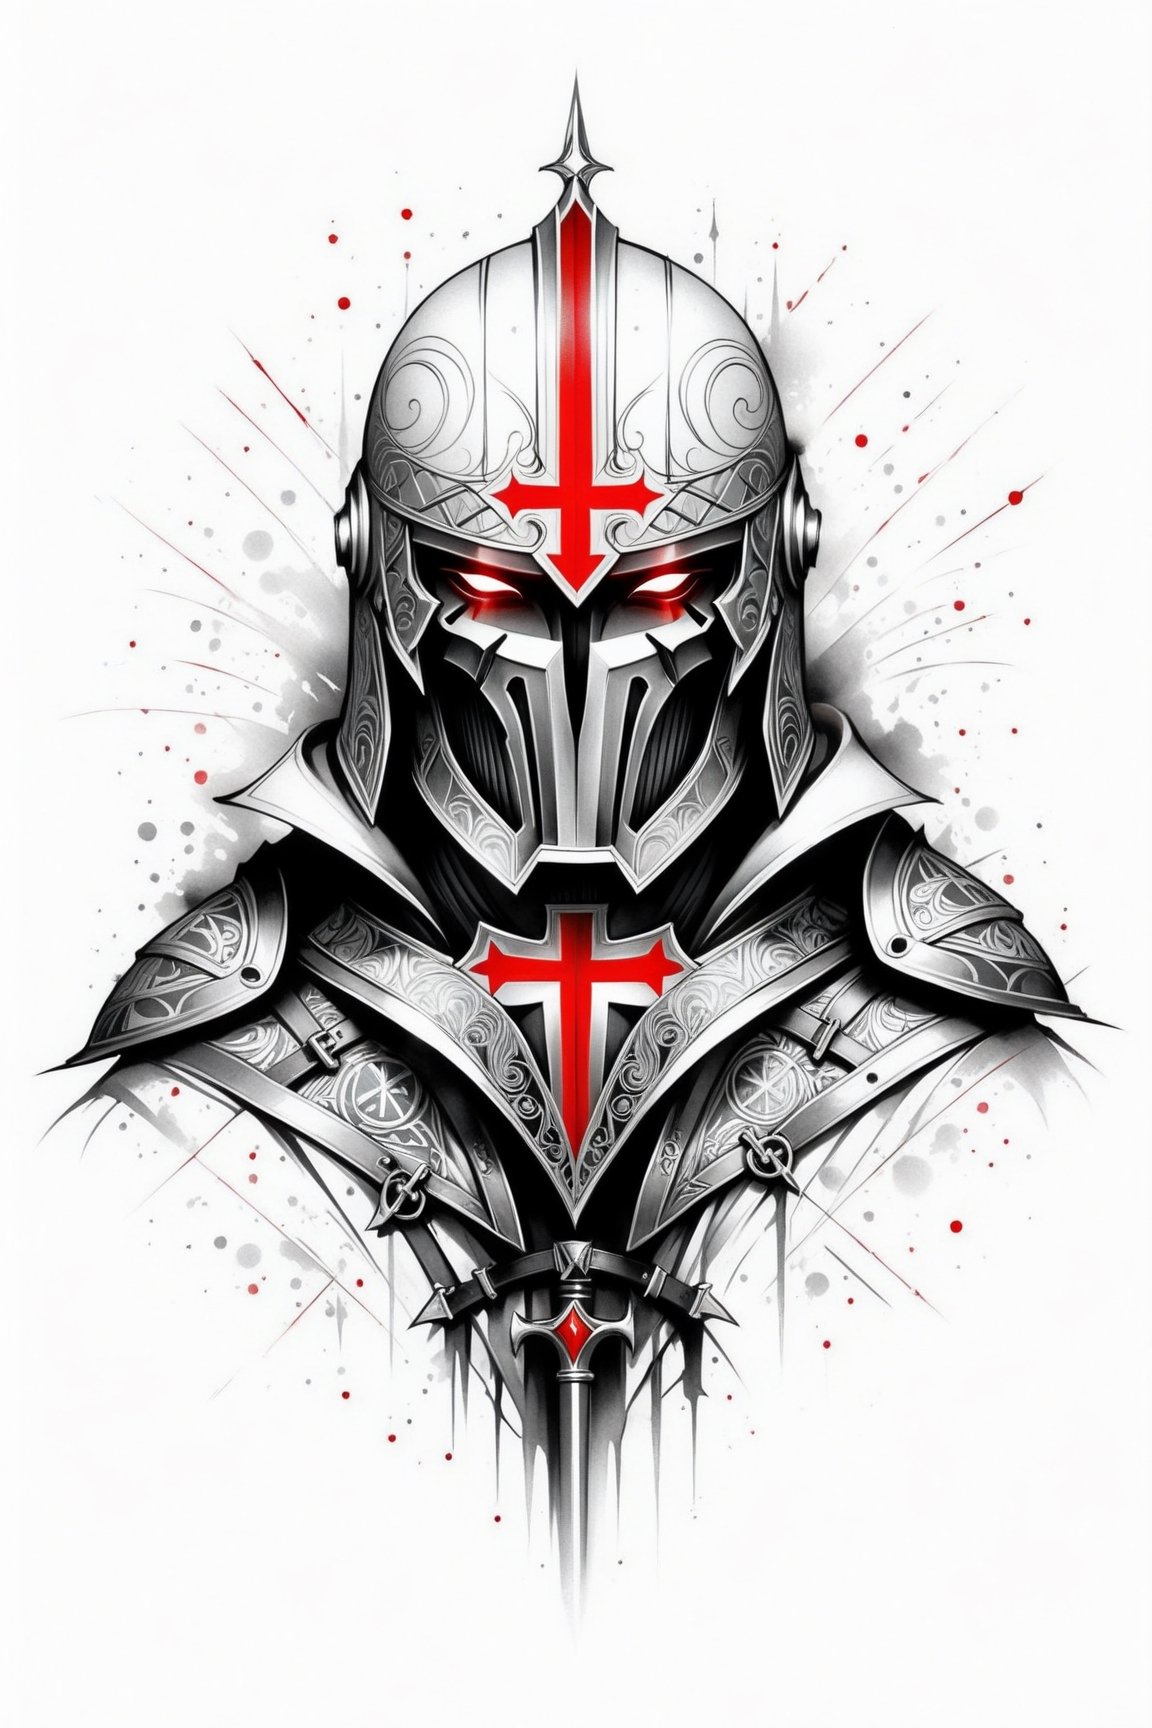 lineart tattoo design, Knight Templar, geometric forms with red cross superimpossed, ((drawing lines)), drawing in black and withe, thick lines, filagree, realistic, silkscreen dot pattern in background, white background, monster, Leonardo Style,Pencil Draw,Fashion Illustration,Flat vector art,pencil sketch,1y0n